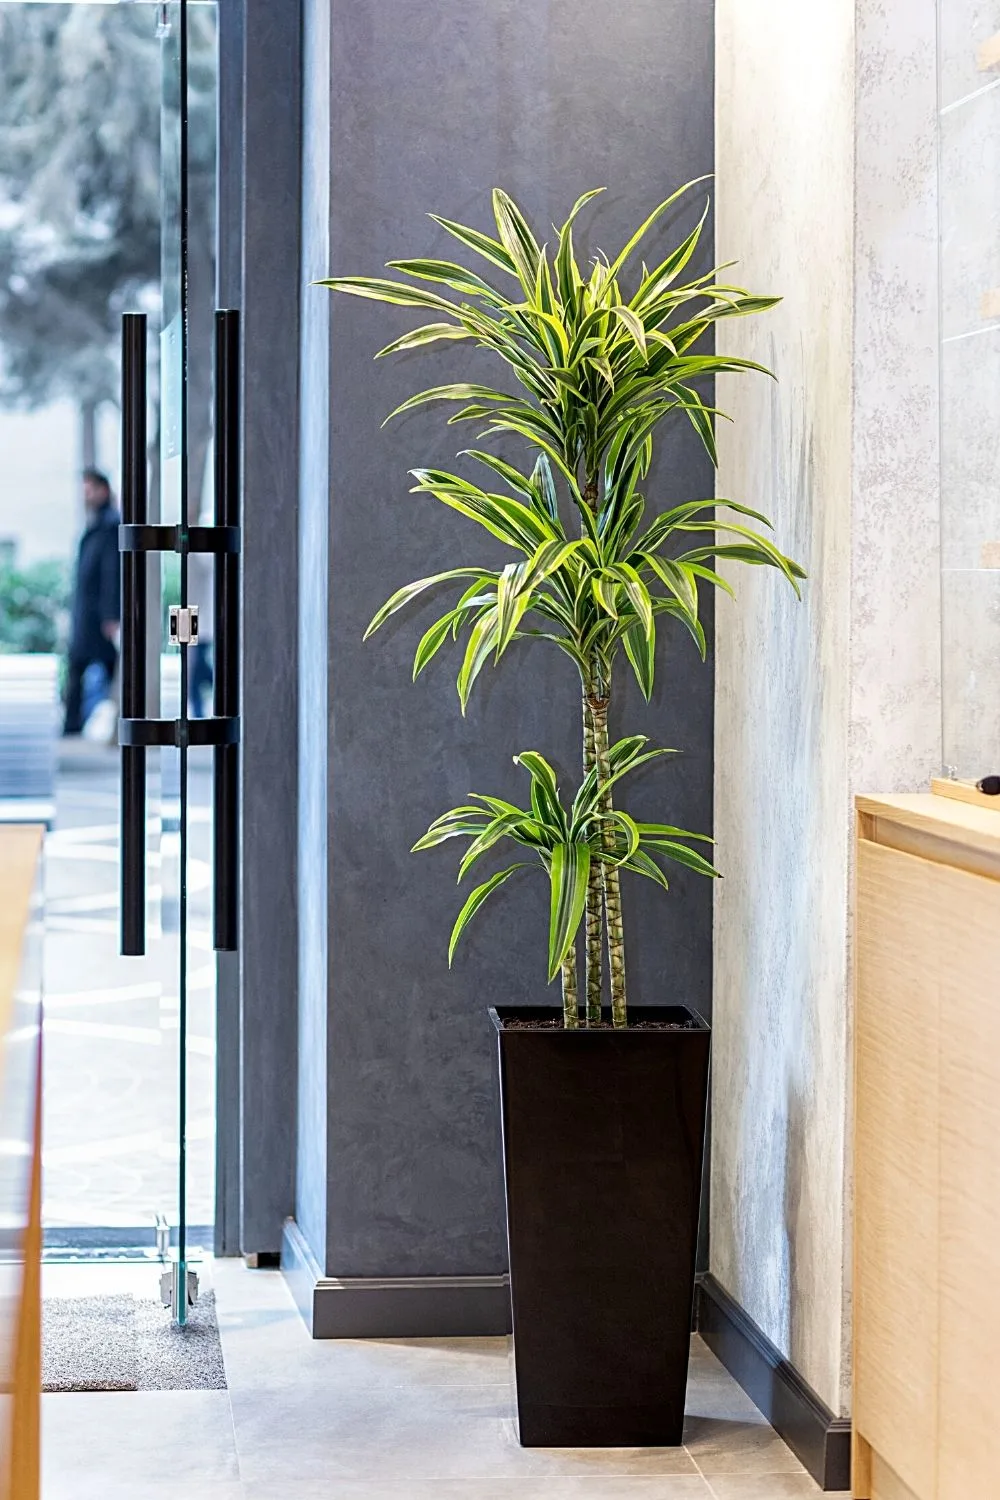 Dracaena Fragrans is a great plant to grow by your southwest-facing window if you love its ability to clean the surrounding air of toxins